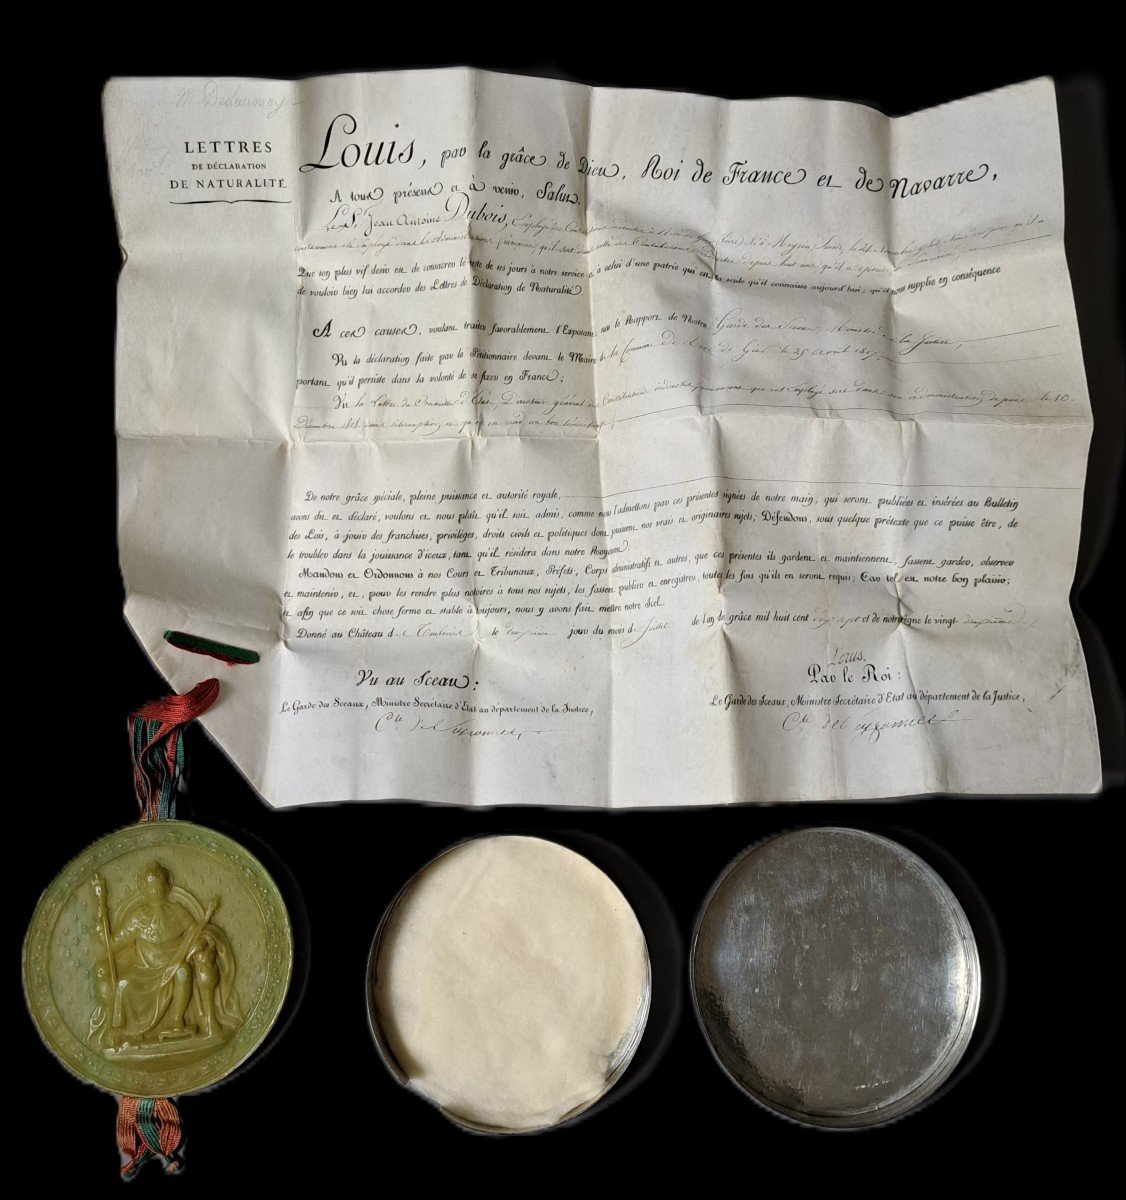 Declaration Of Naturalness - Signed By Louis XVIII - Sealed With The Great Seal Of France